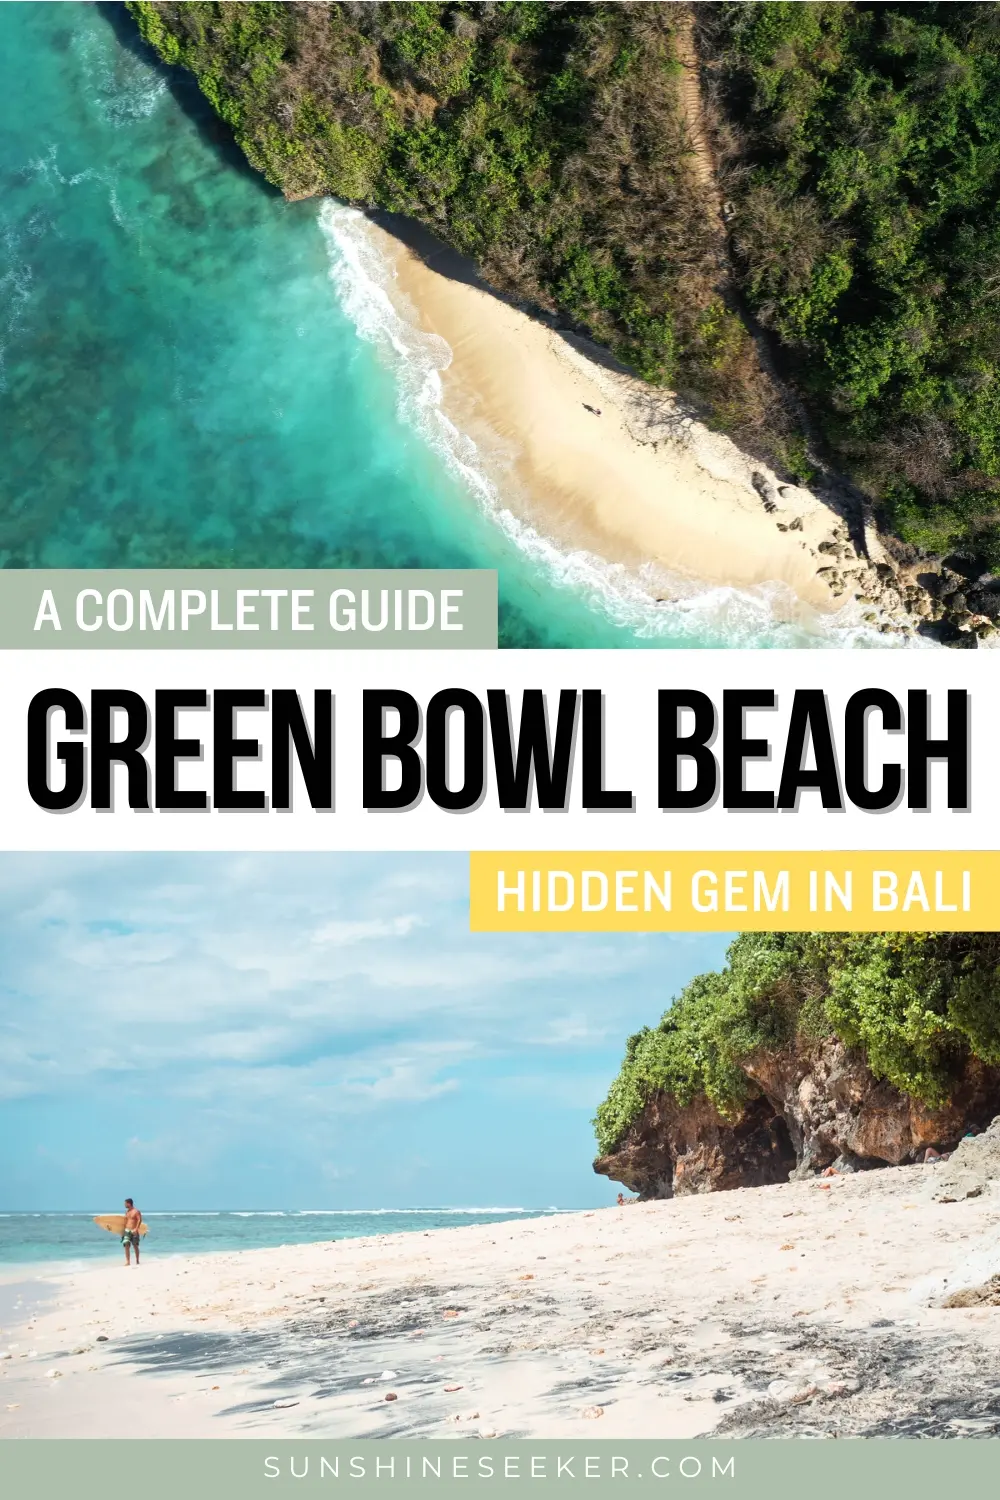 Don't miss Green Bowl Beach while in Bali. It is one of the best surf spots in Uluwatu and a great spot for photos. Click through for a complete guide on how to get to Green Bowl Beach, the best time to visit and what to expect.